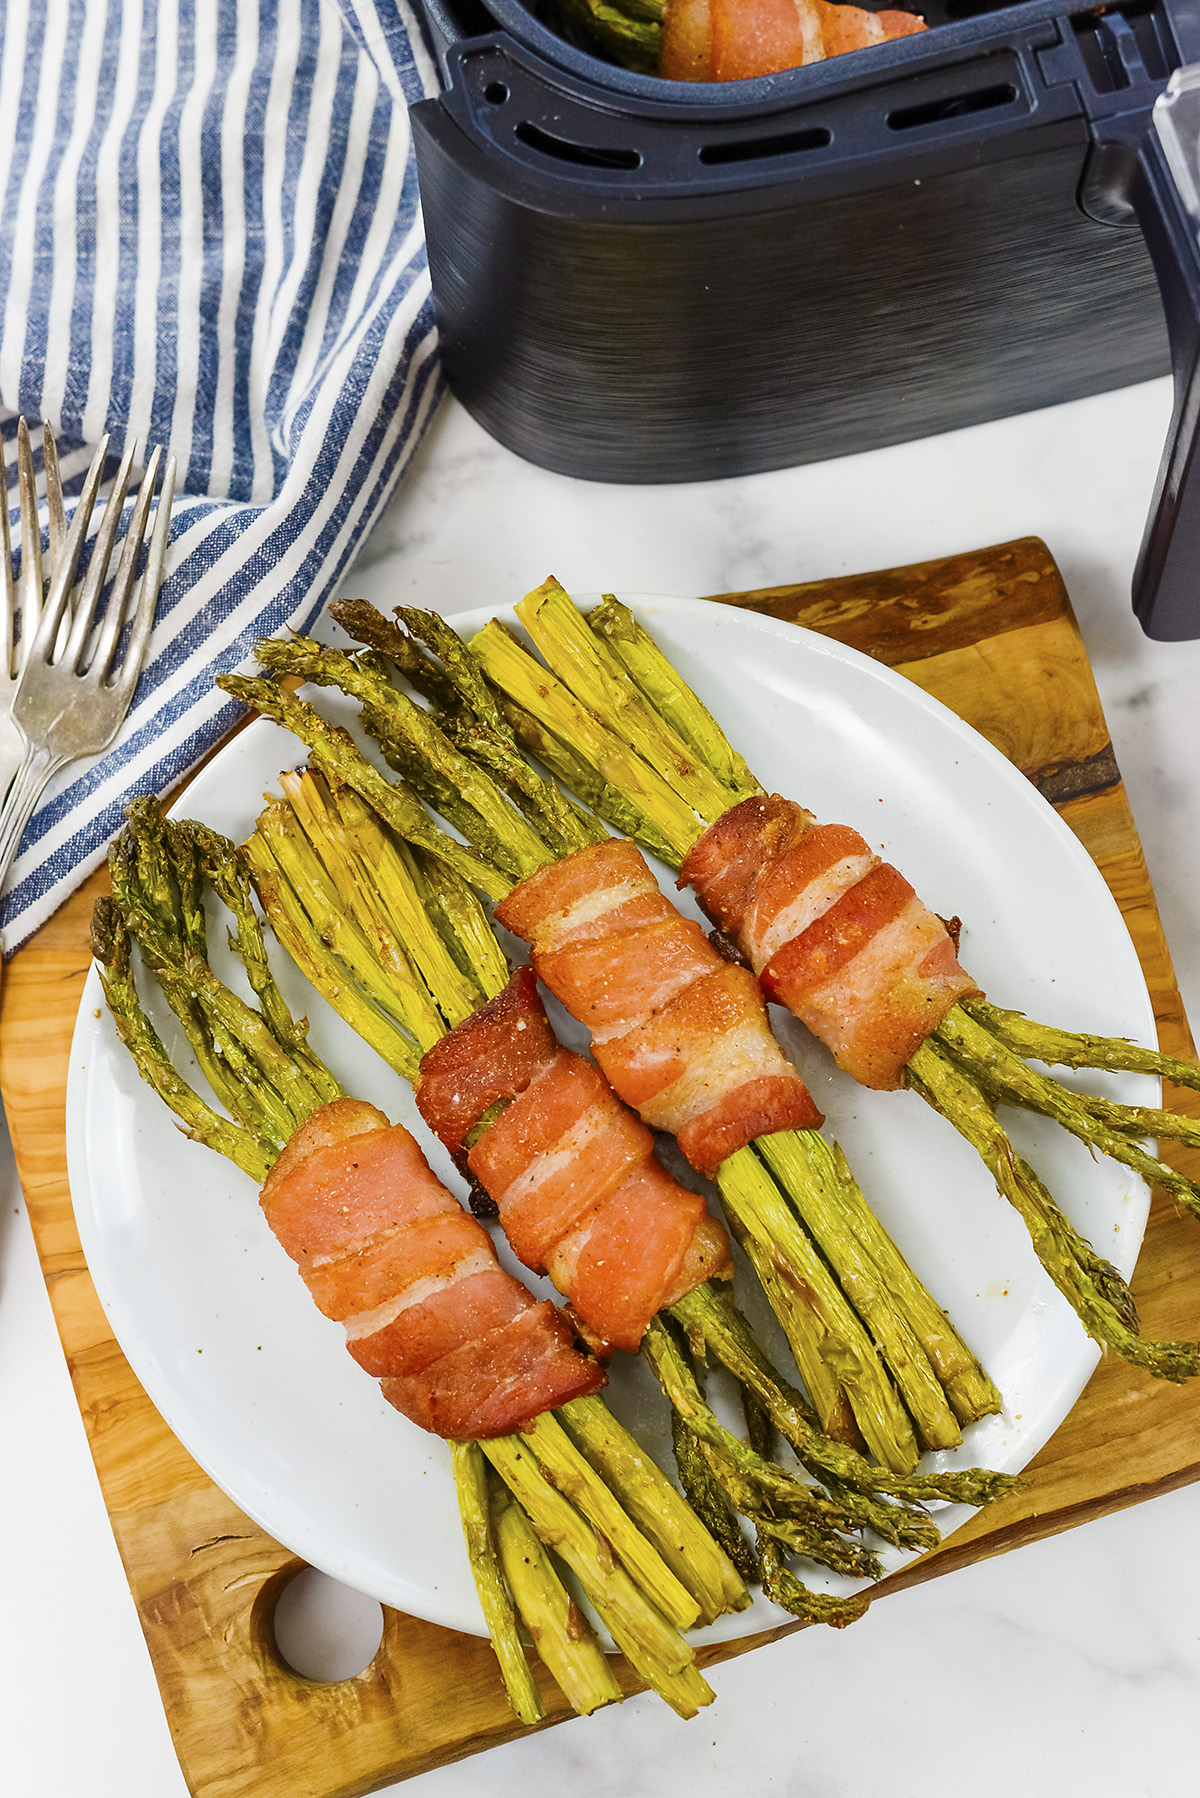 Bacon wrapped asparagus on a white plate in front of an air fryer.